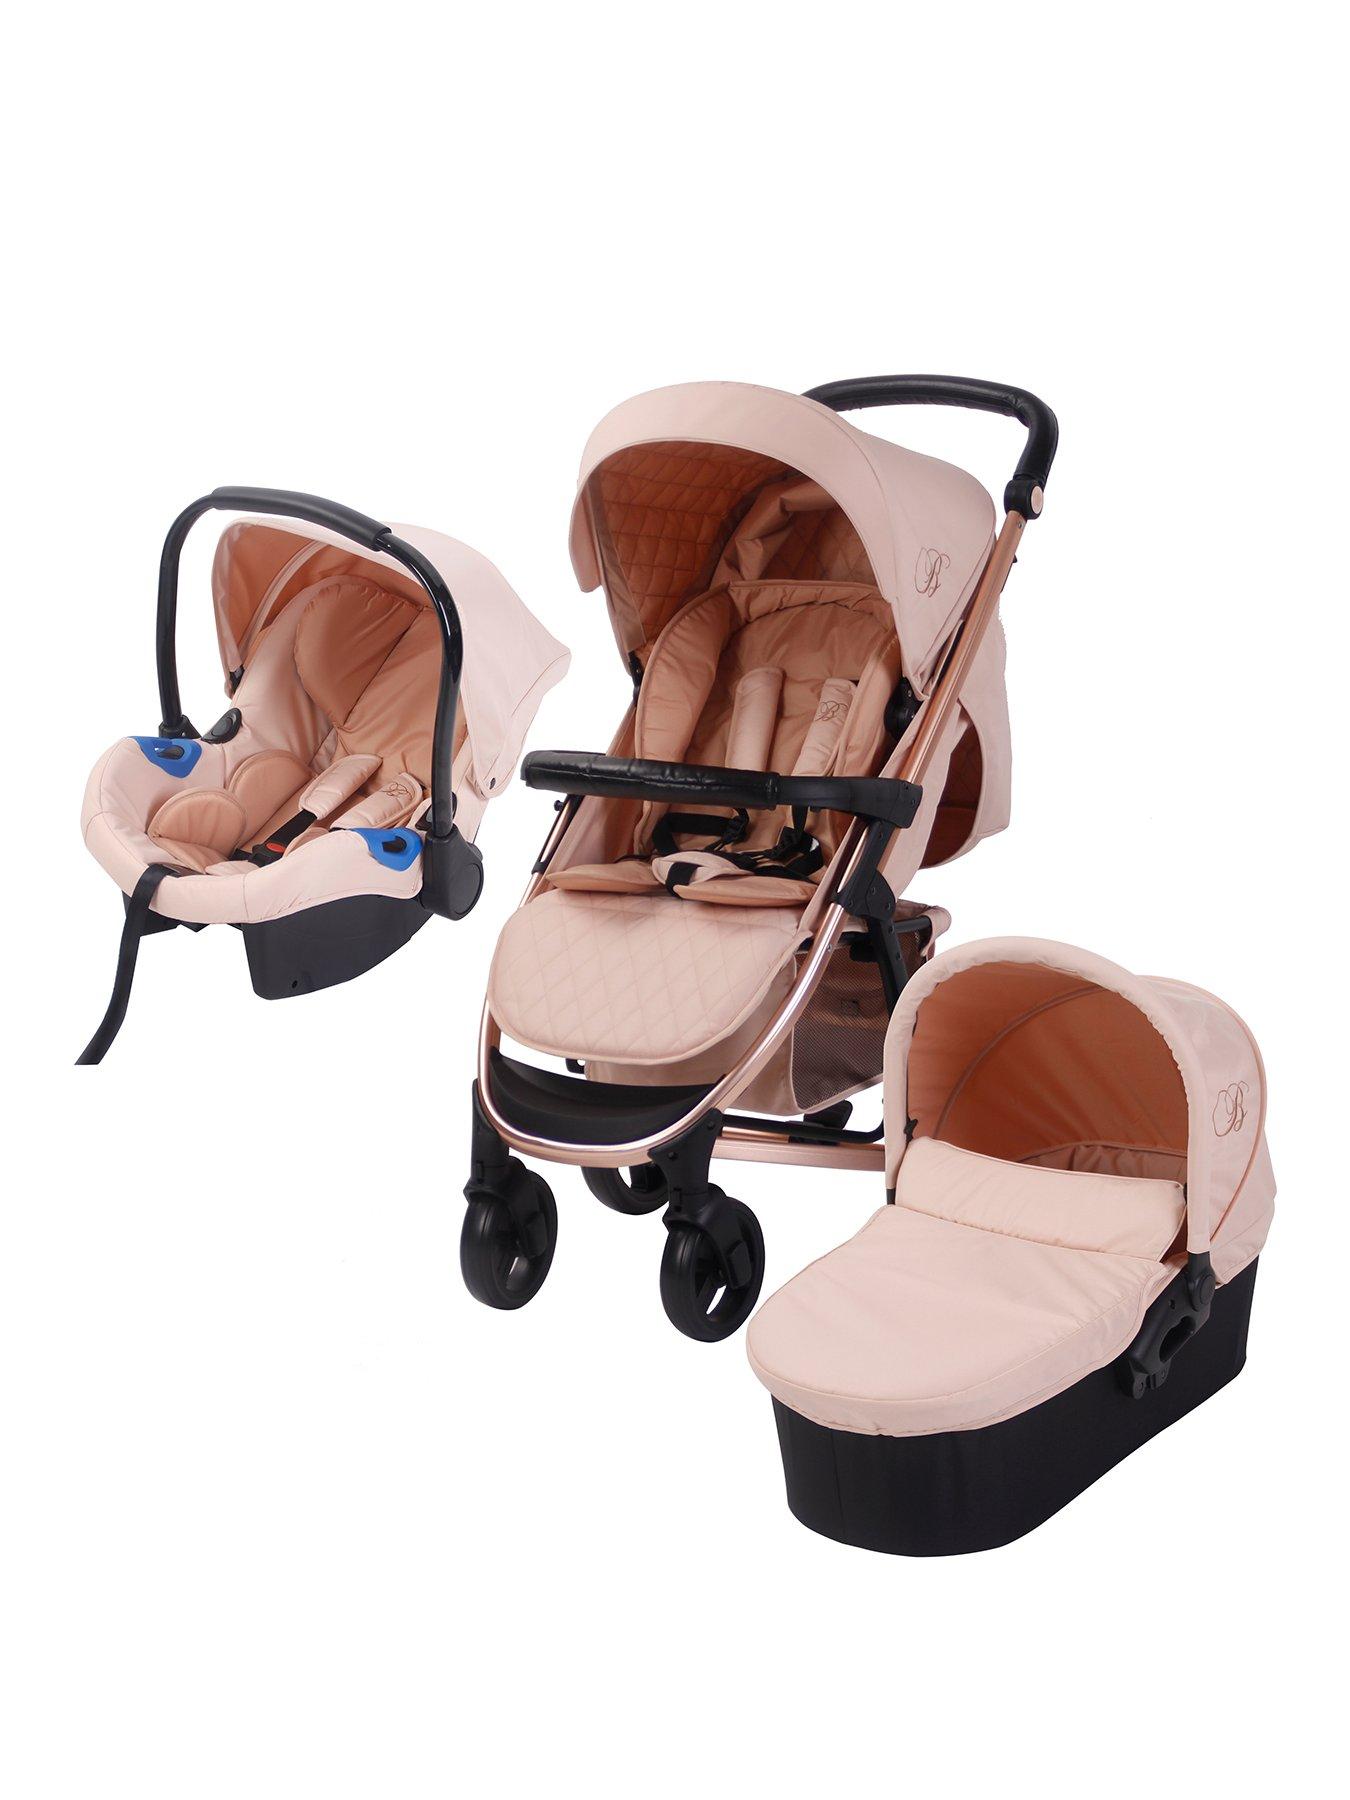 my babiie billie faiers mb200  travel system